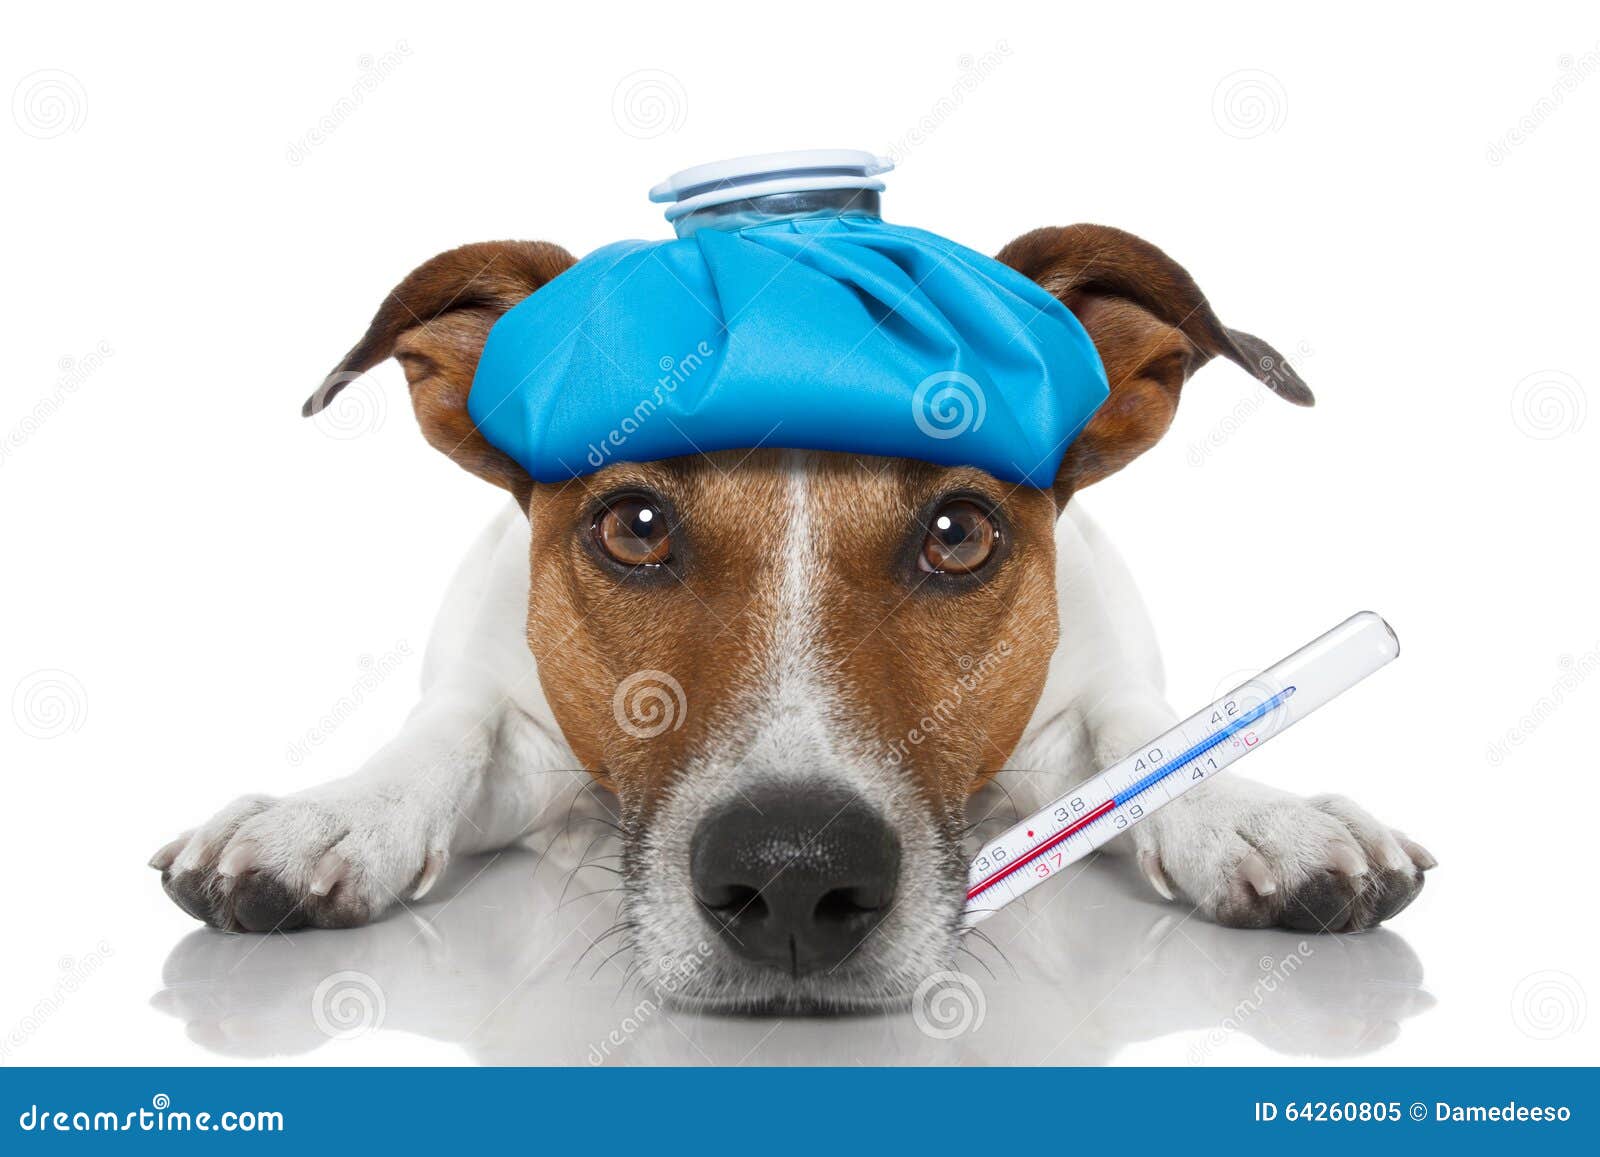 https://thumbs.dreamstime.com/z/sick-ill-dog-jack-russell-floor-hangover-fever-ice-bag-head-thermometer-mouth-isolated-64260805.jpg